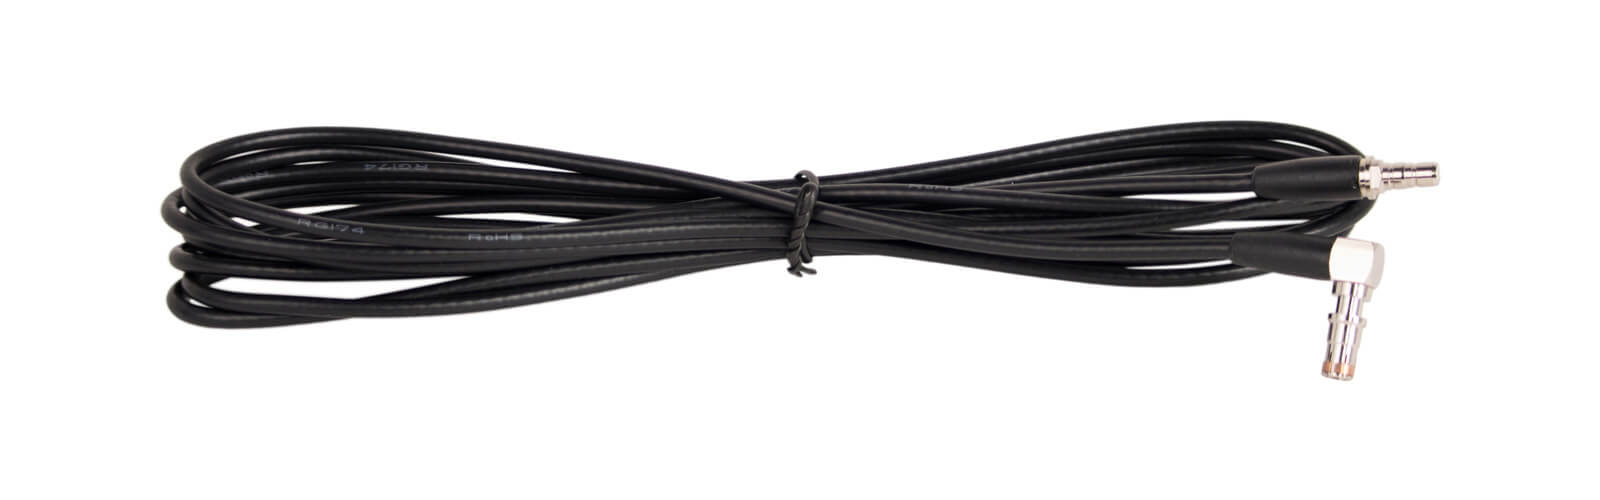 SiriusXM 5 Foot Antenna Extension Cable